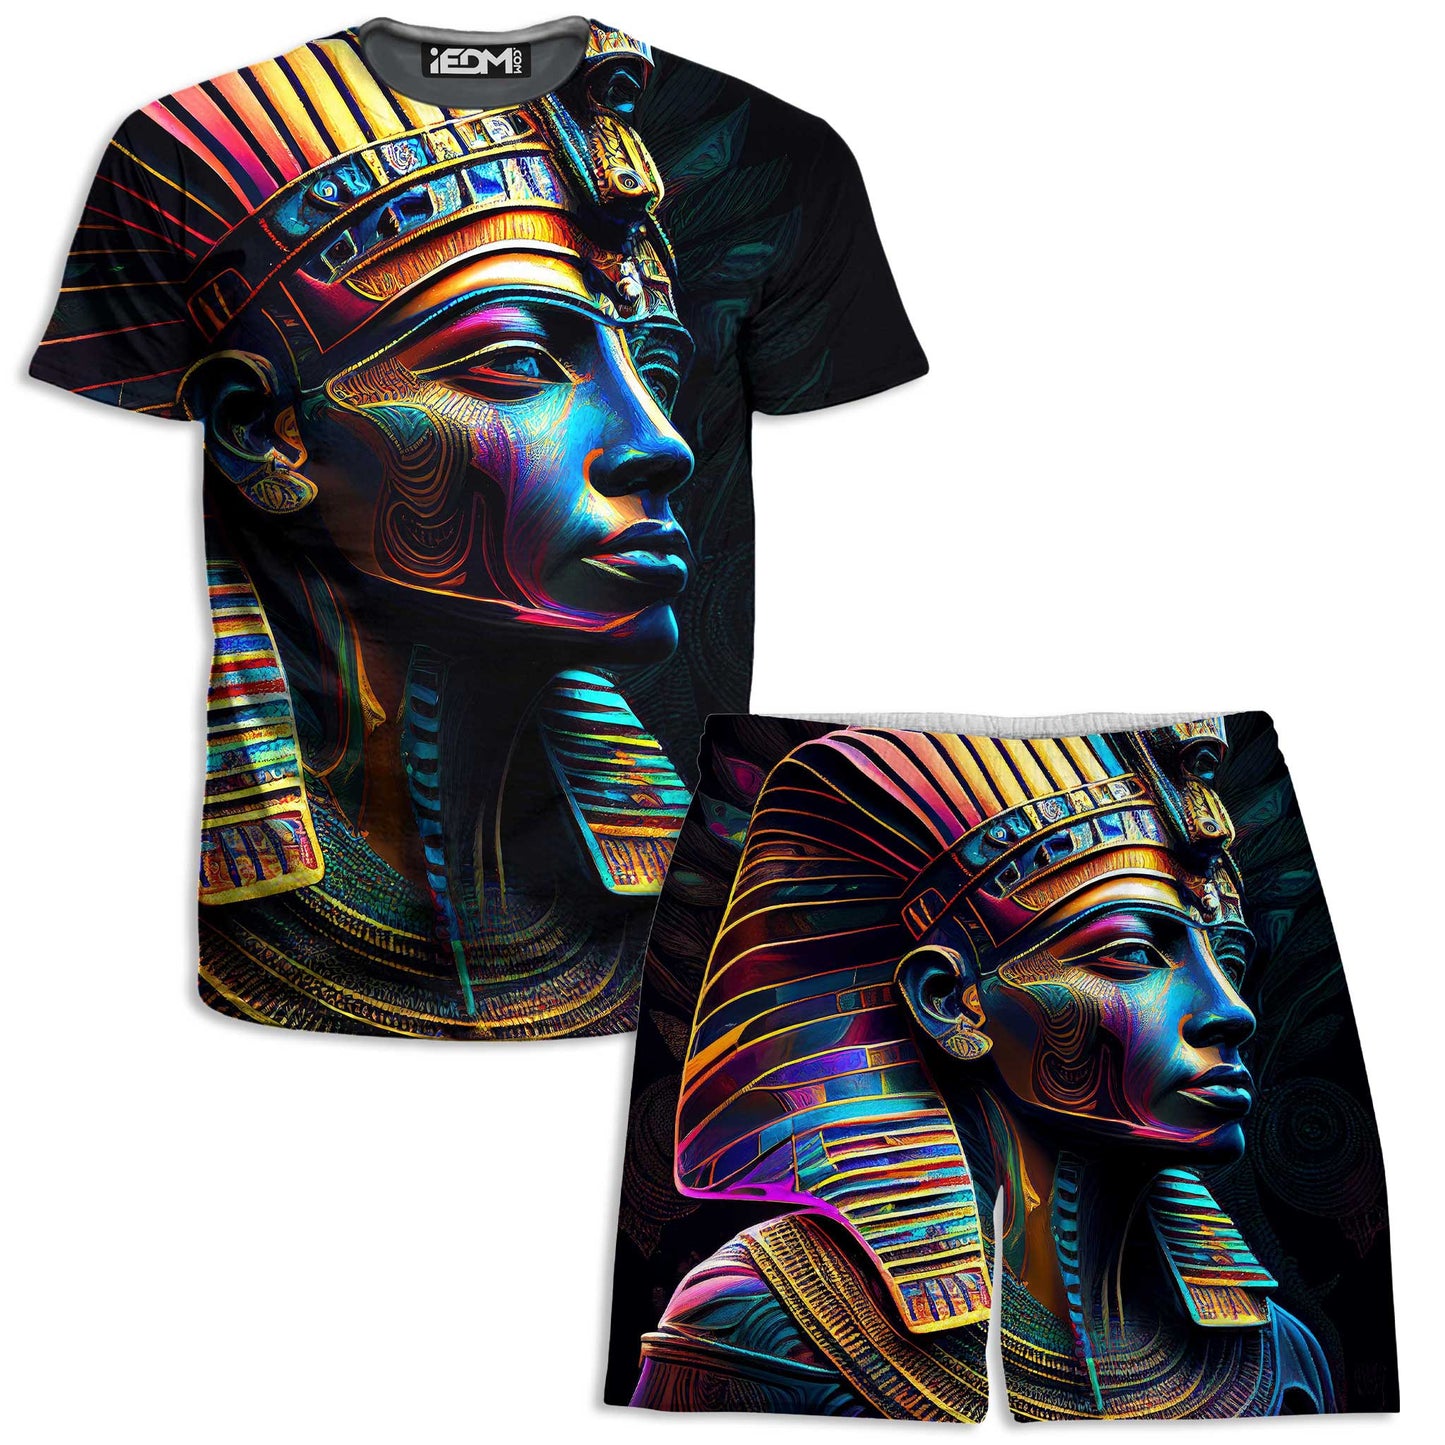 Empires Lost T-Shirt and Shorts Combo, iEDM, | iEDM